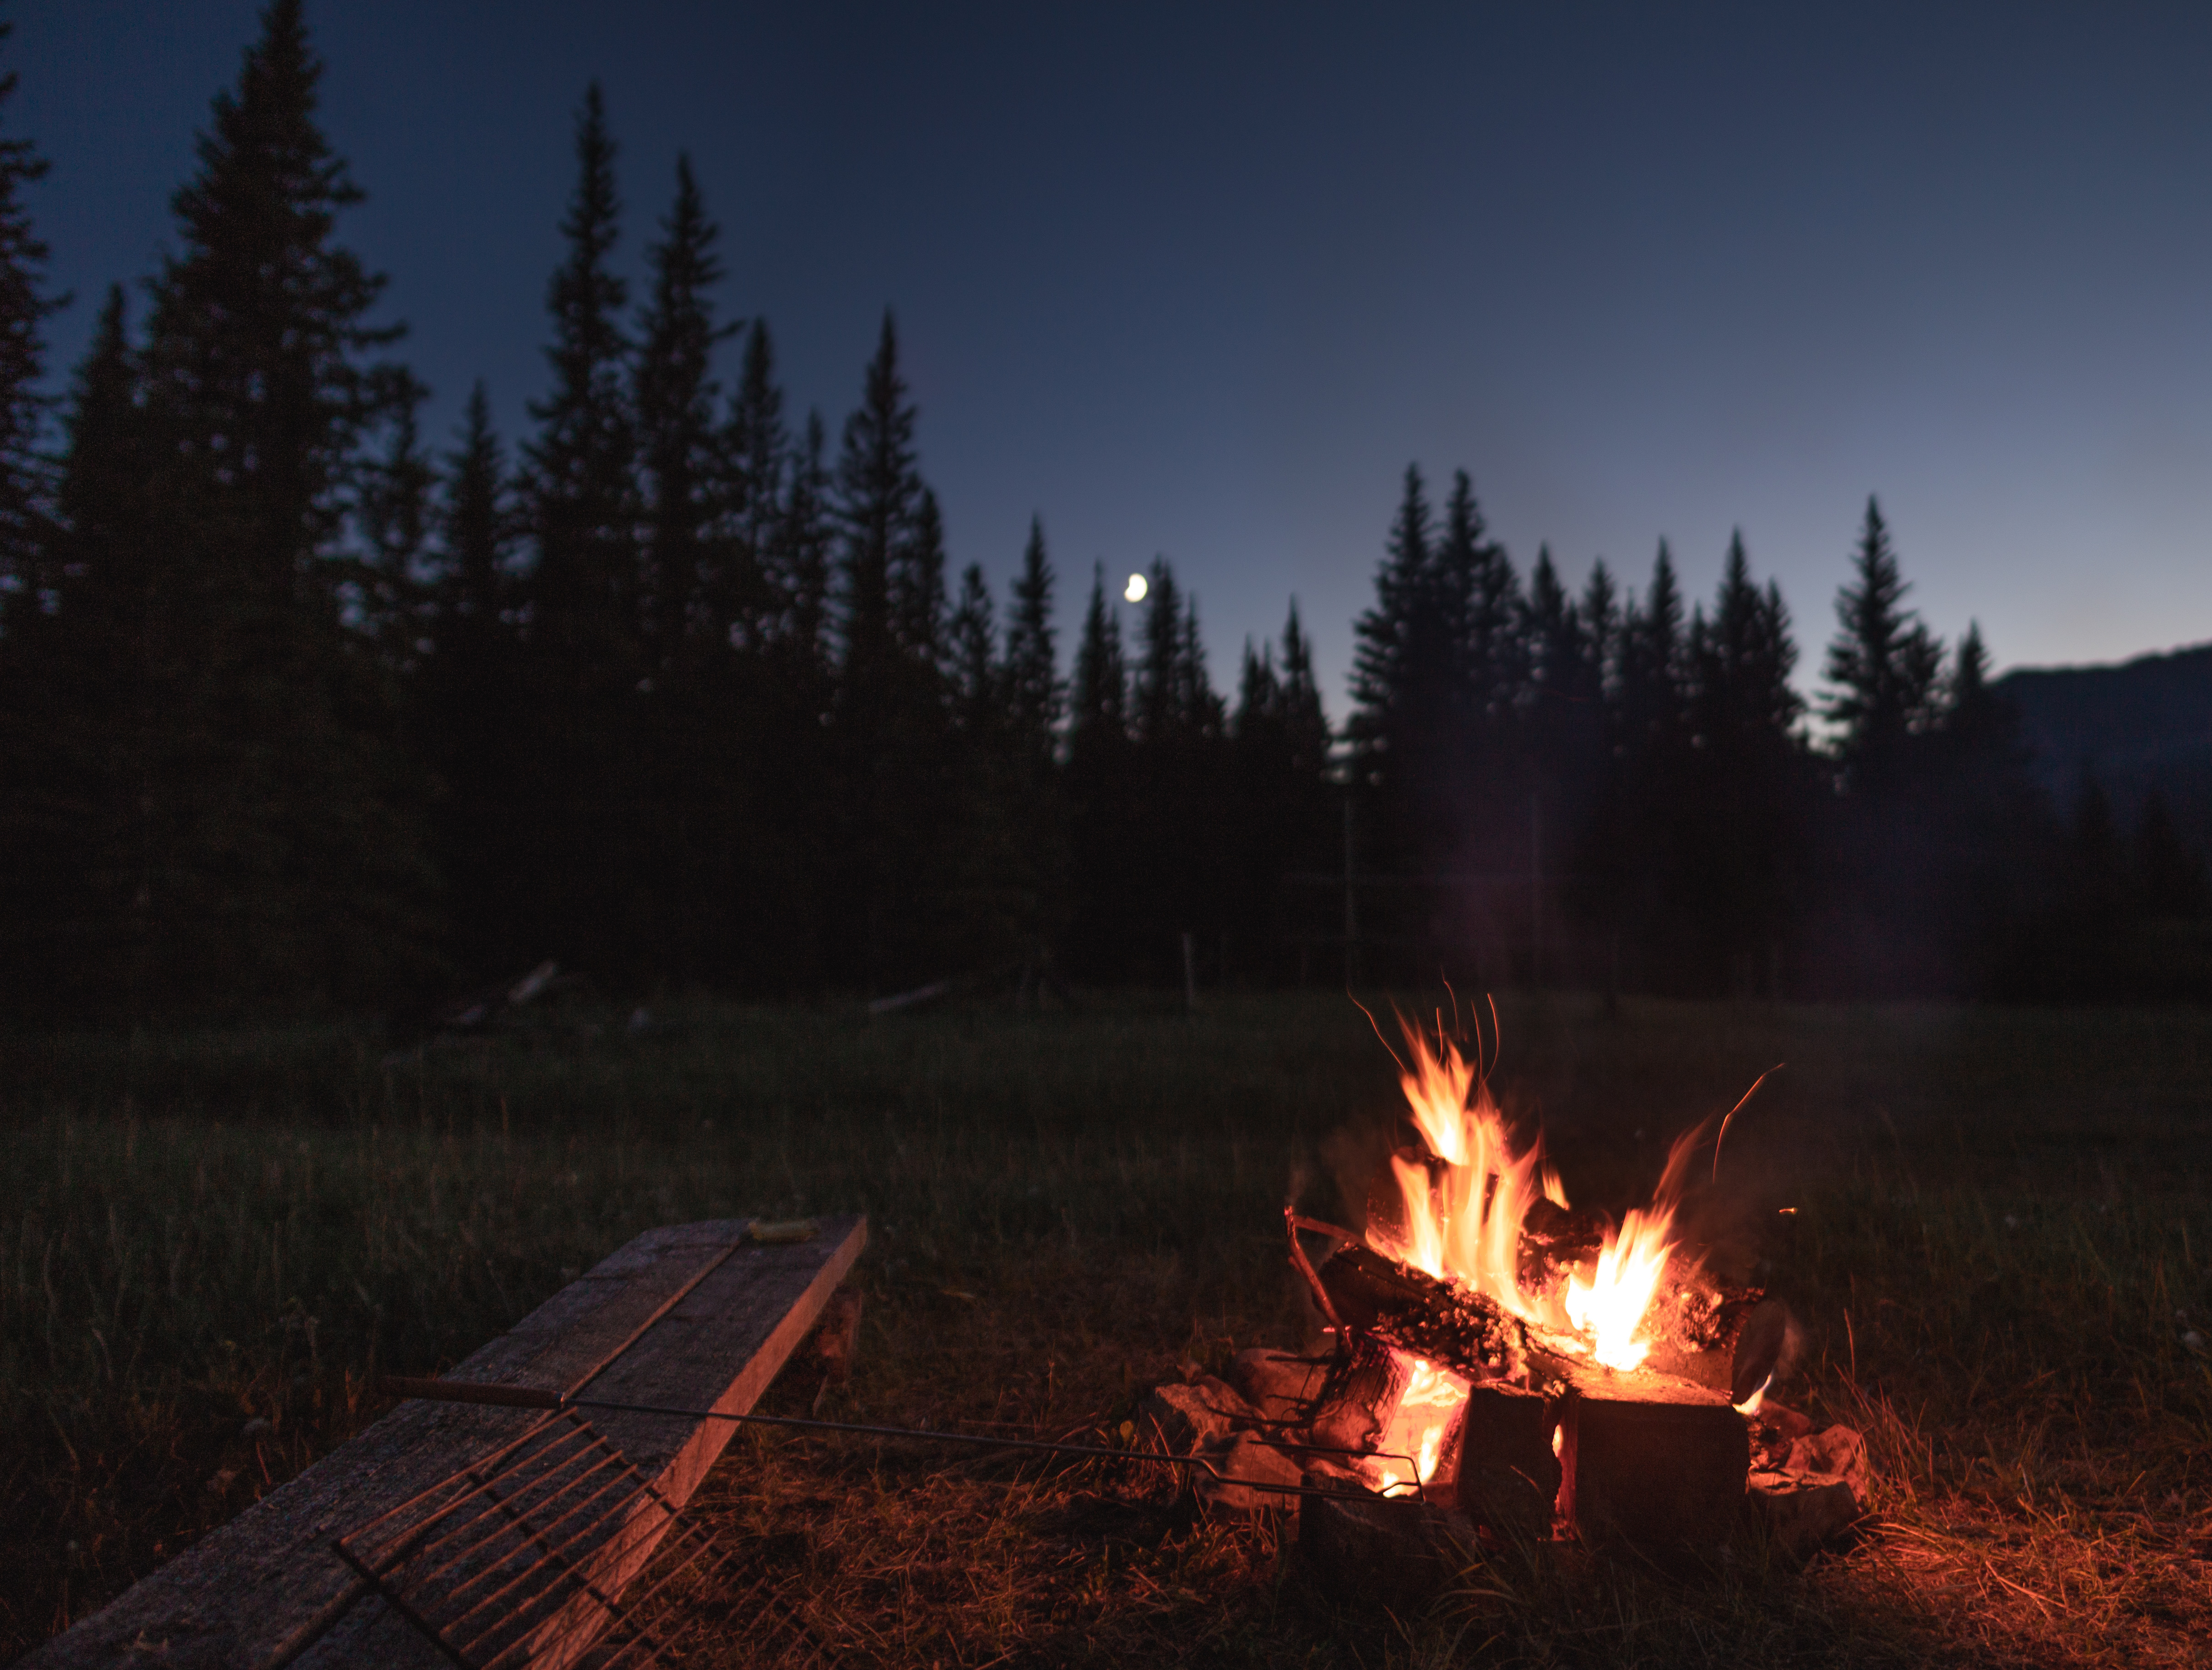 Campfire under the out of focus moon. There is a wooden bench beside